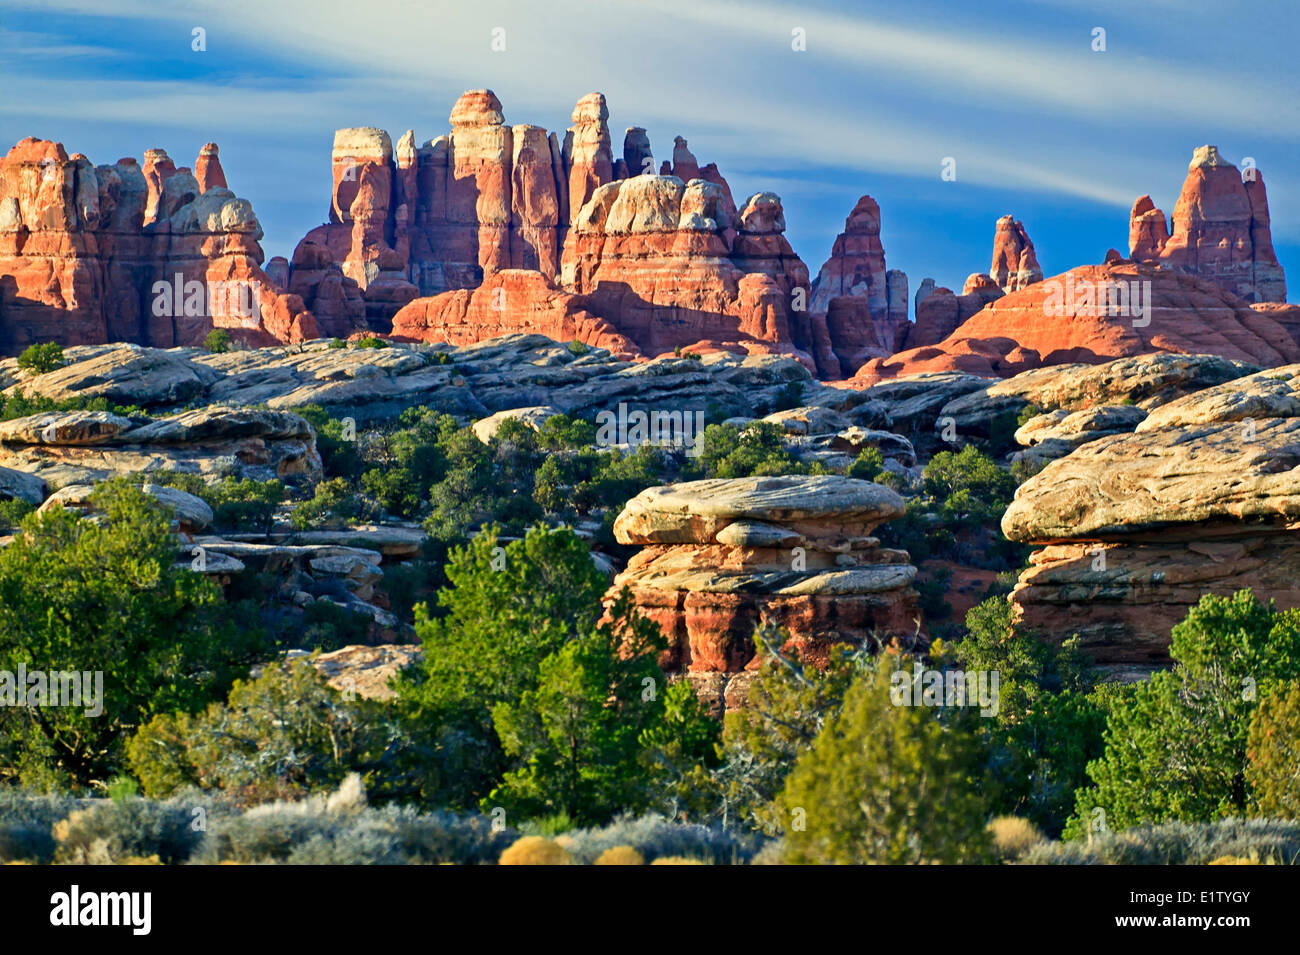 The Needles, The Needles District, Canyonlands National Park, Utah, USA, North America. Stock Photo